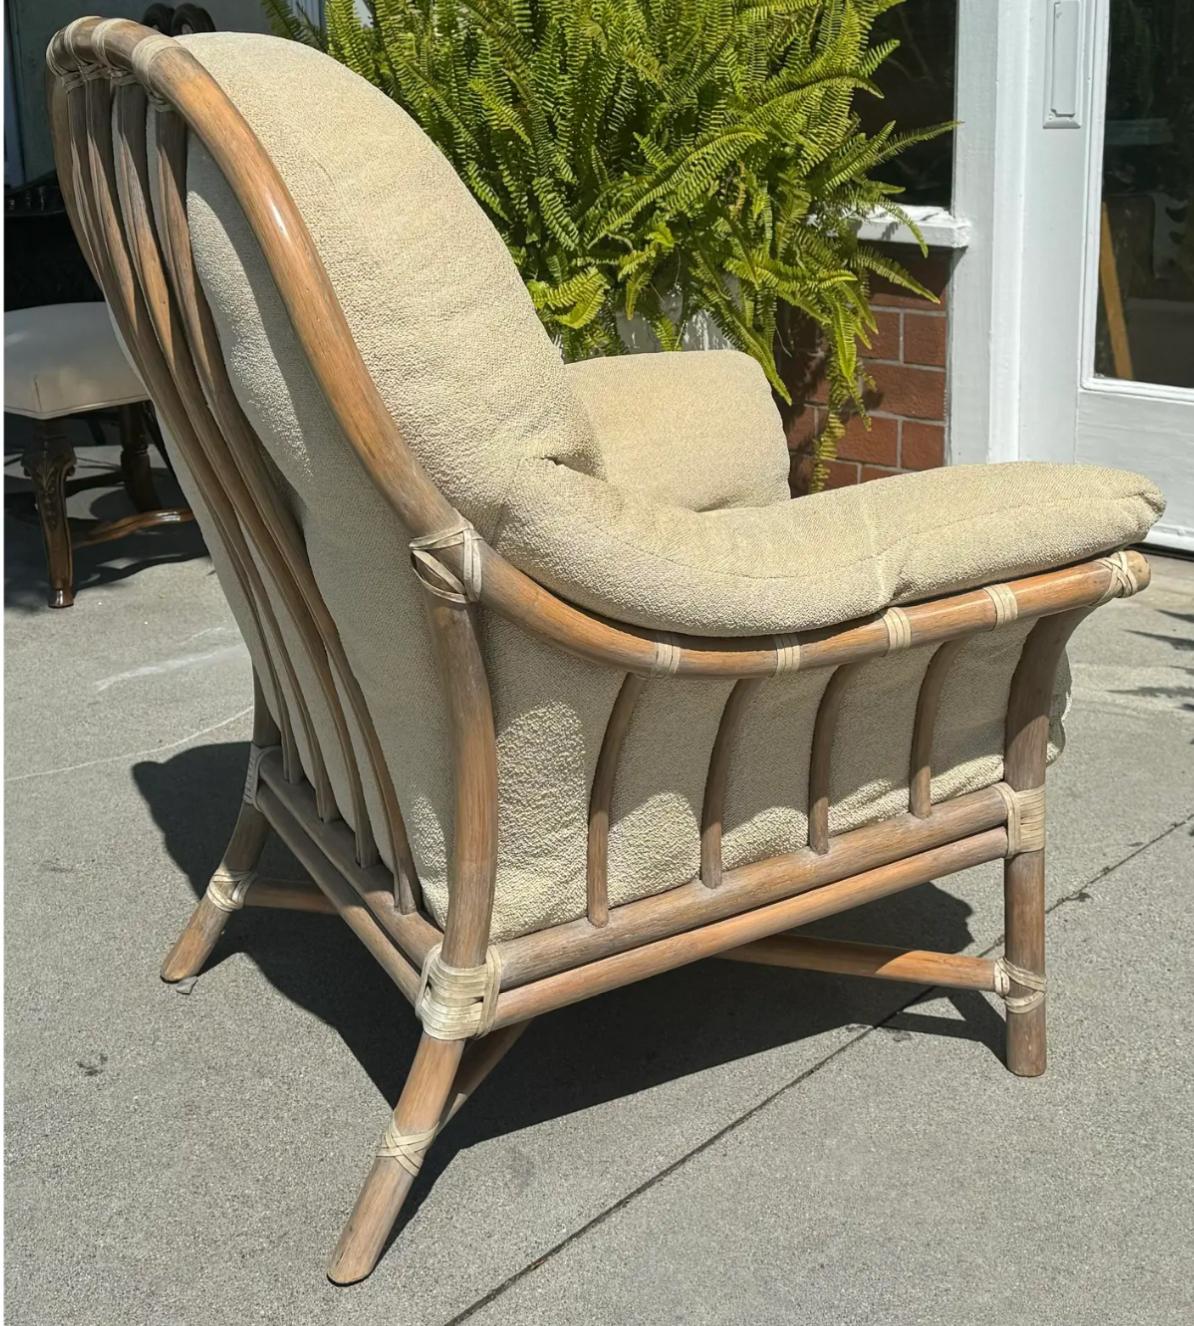 Signed McGuire Furniture Company Bamboo Lounge Club Chair. This listing is for one chair but we actually have two available.